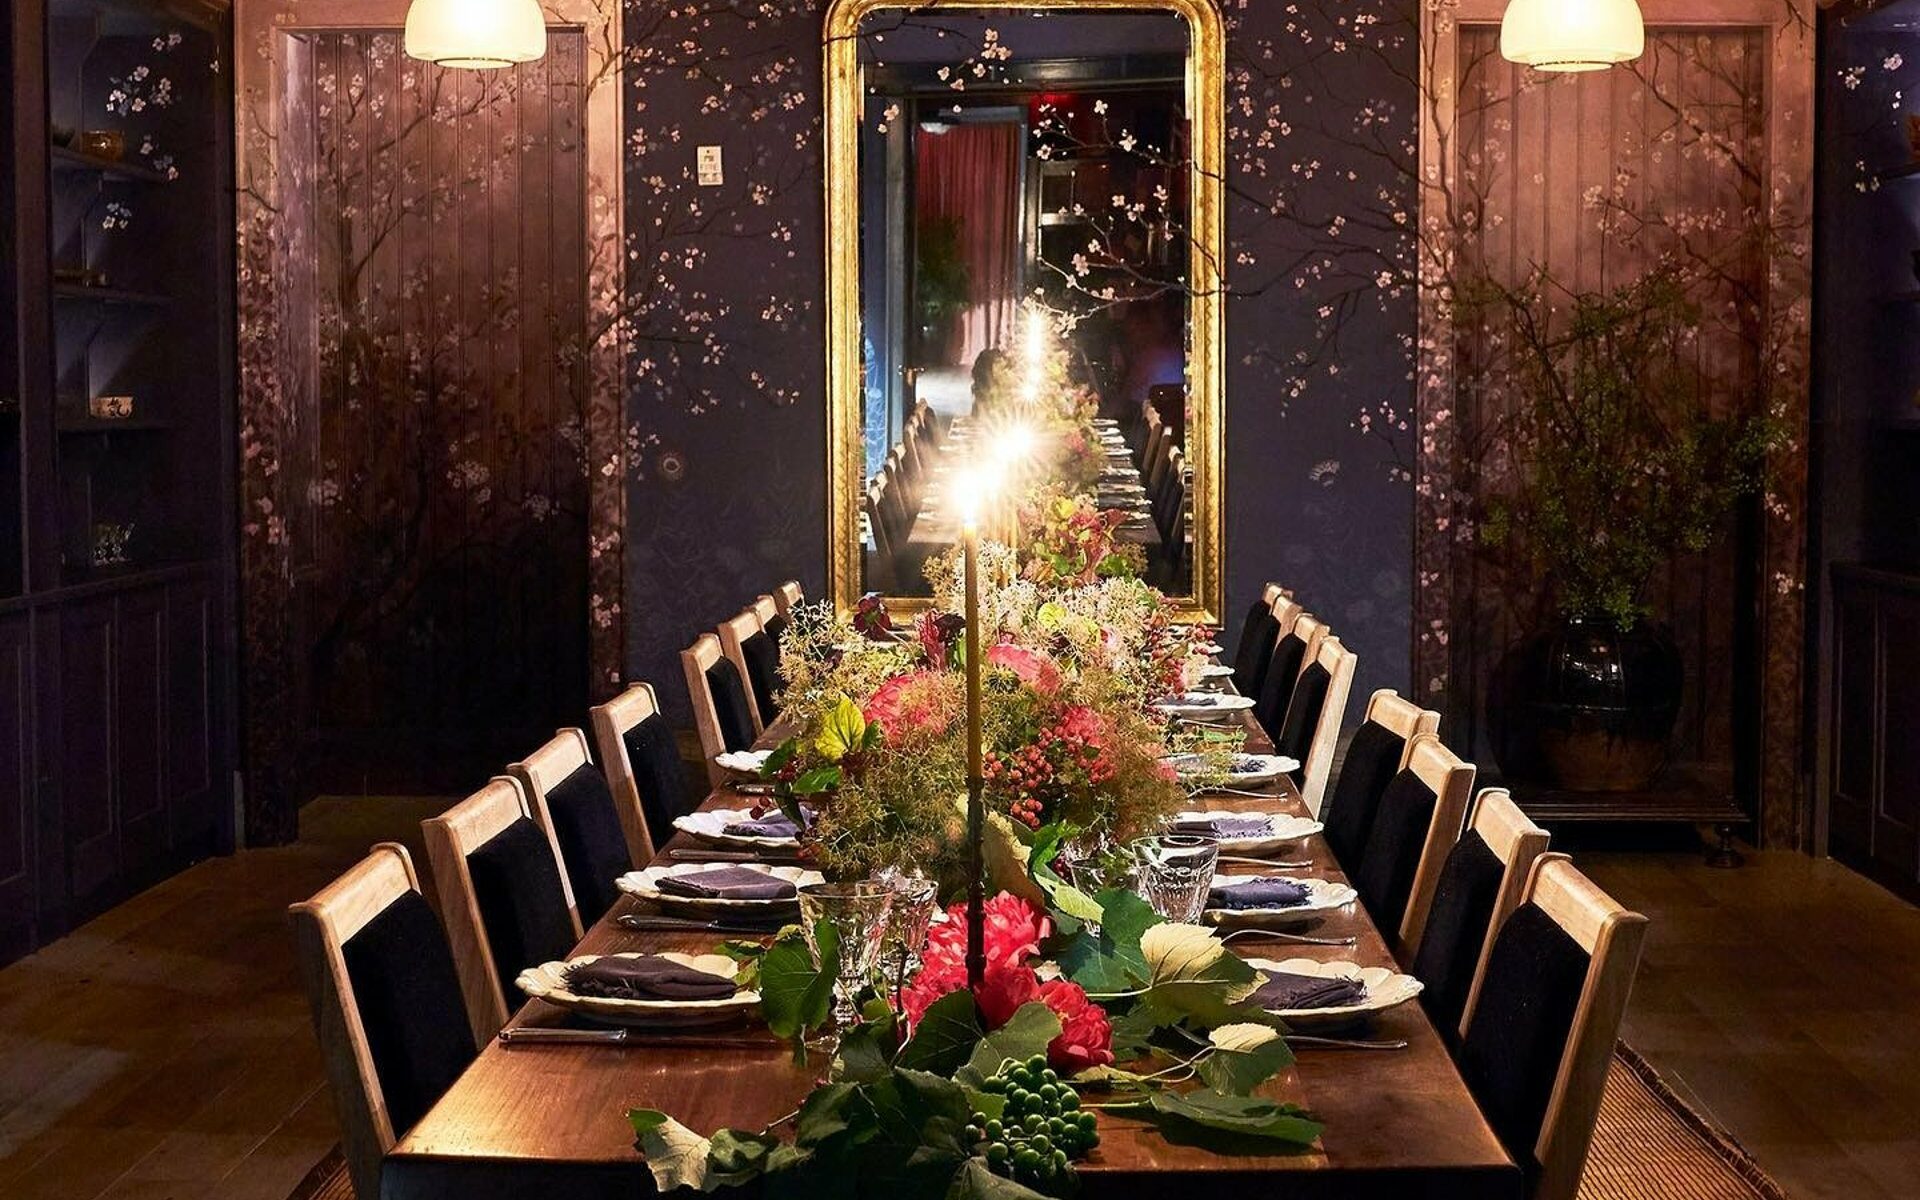 NYC Acclaimed Restaurant La Mercerie's private dining room